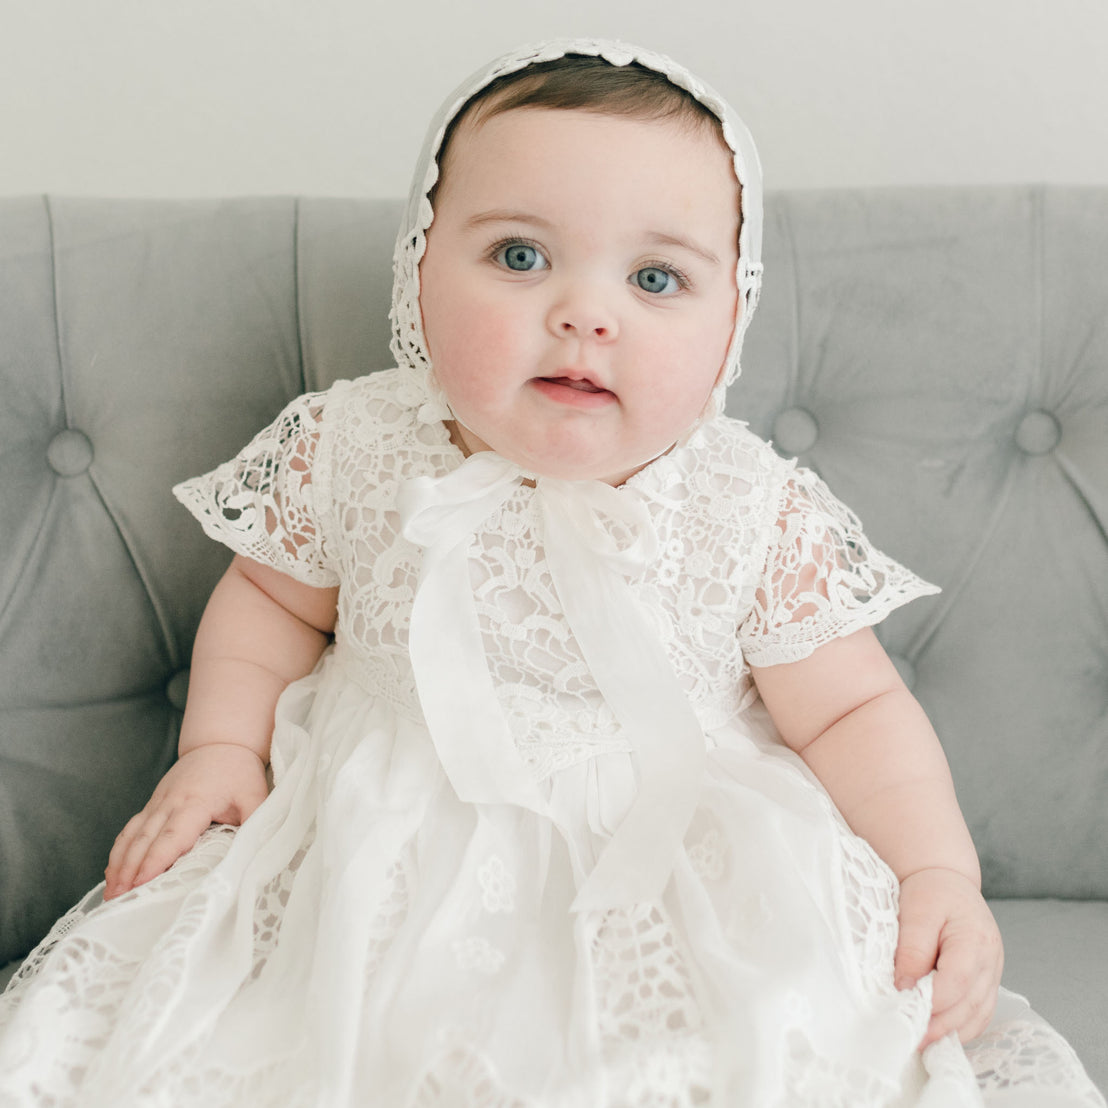 A baby with big blue eyes wearing a Grace Christening Gown & Bonnet sits on a gray sofa, looking directly at the camera with a curious expression.